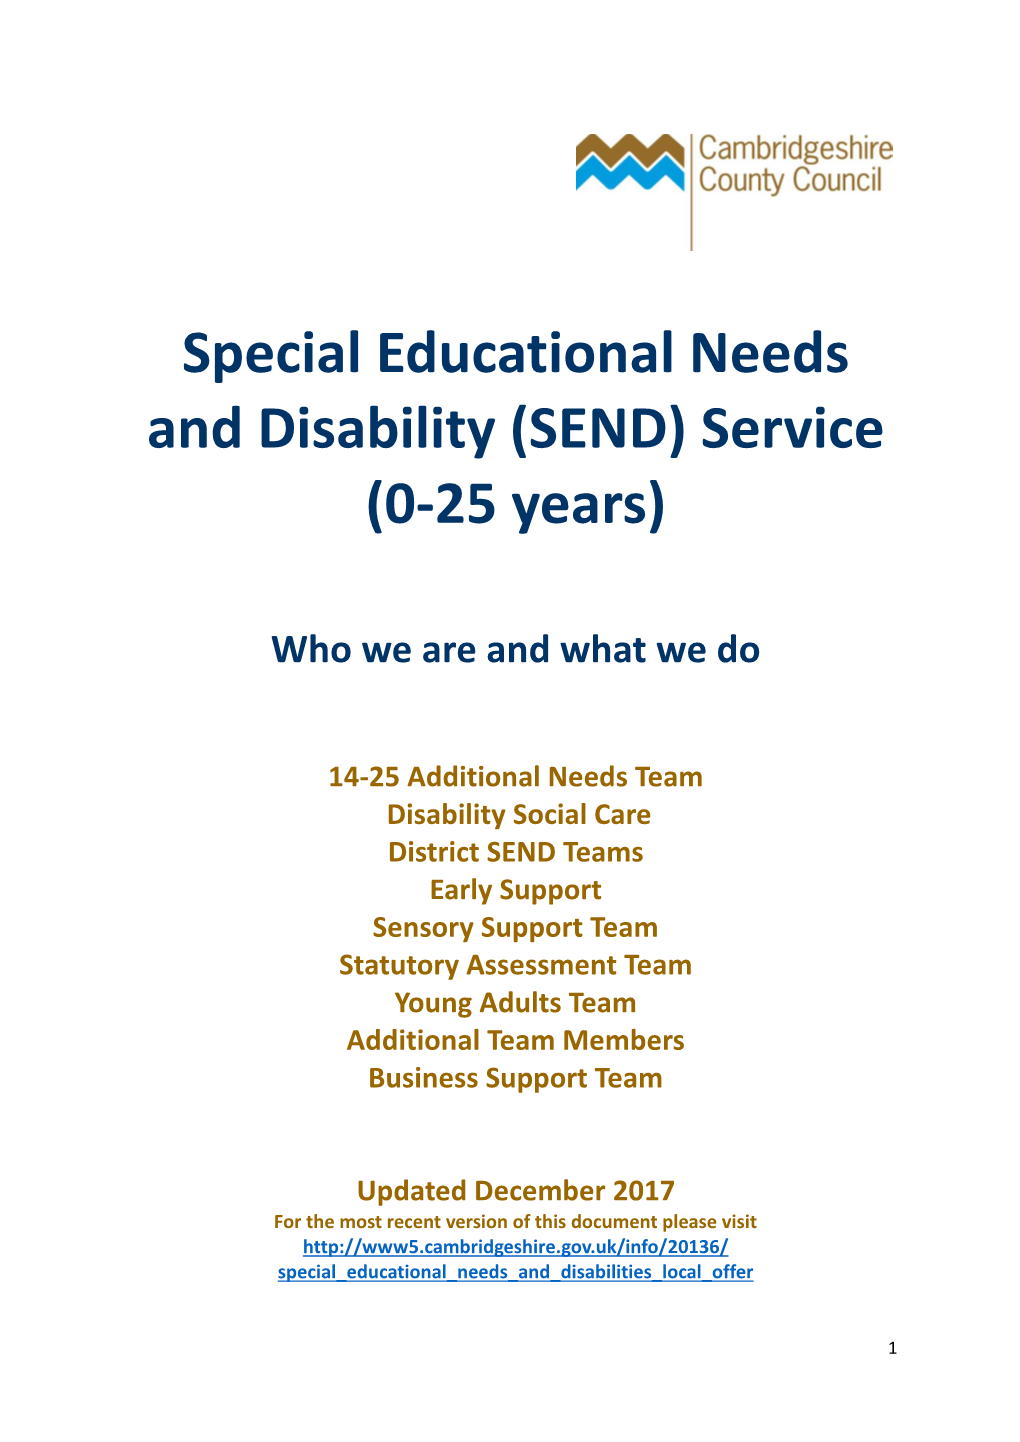 Special Educational Needs and Disability (SEND) Service (0-25 Years)